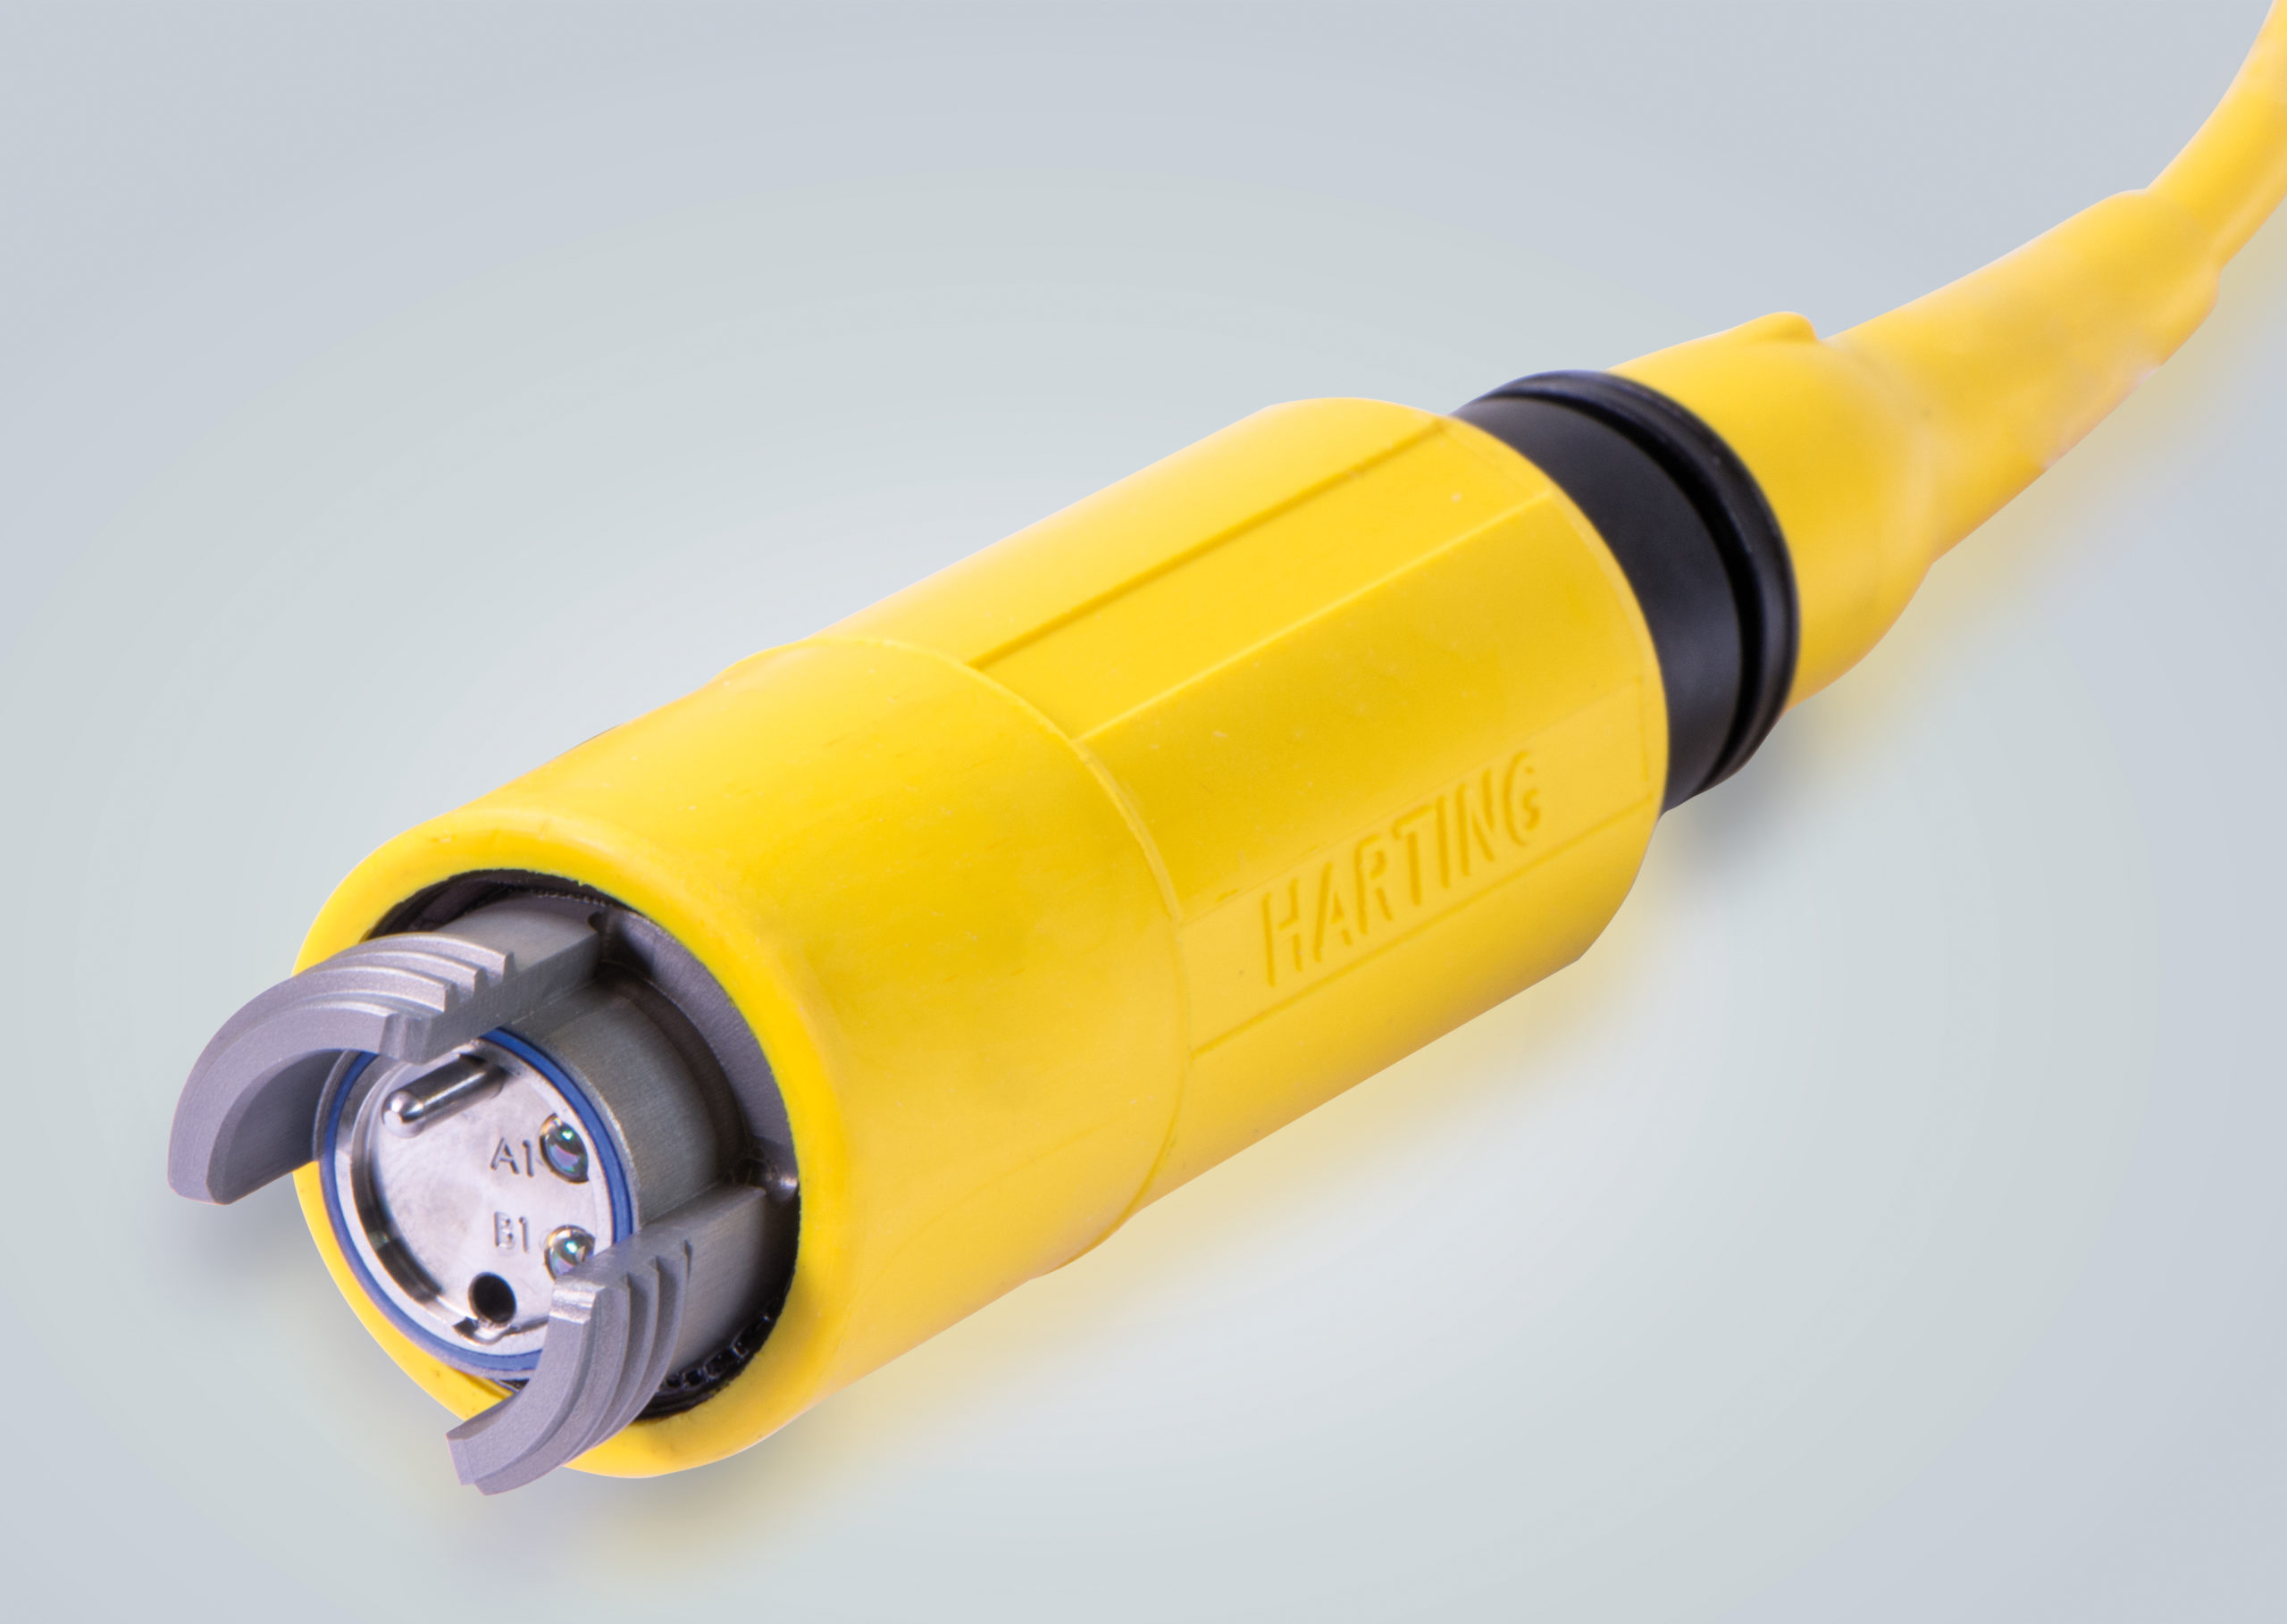 HARTING’s expanded beam fiber optic cable assembly